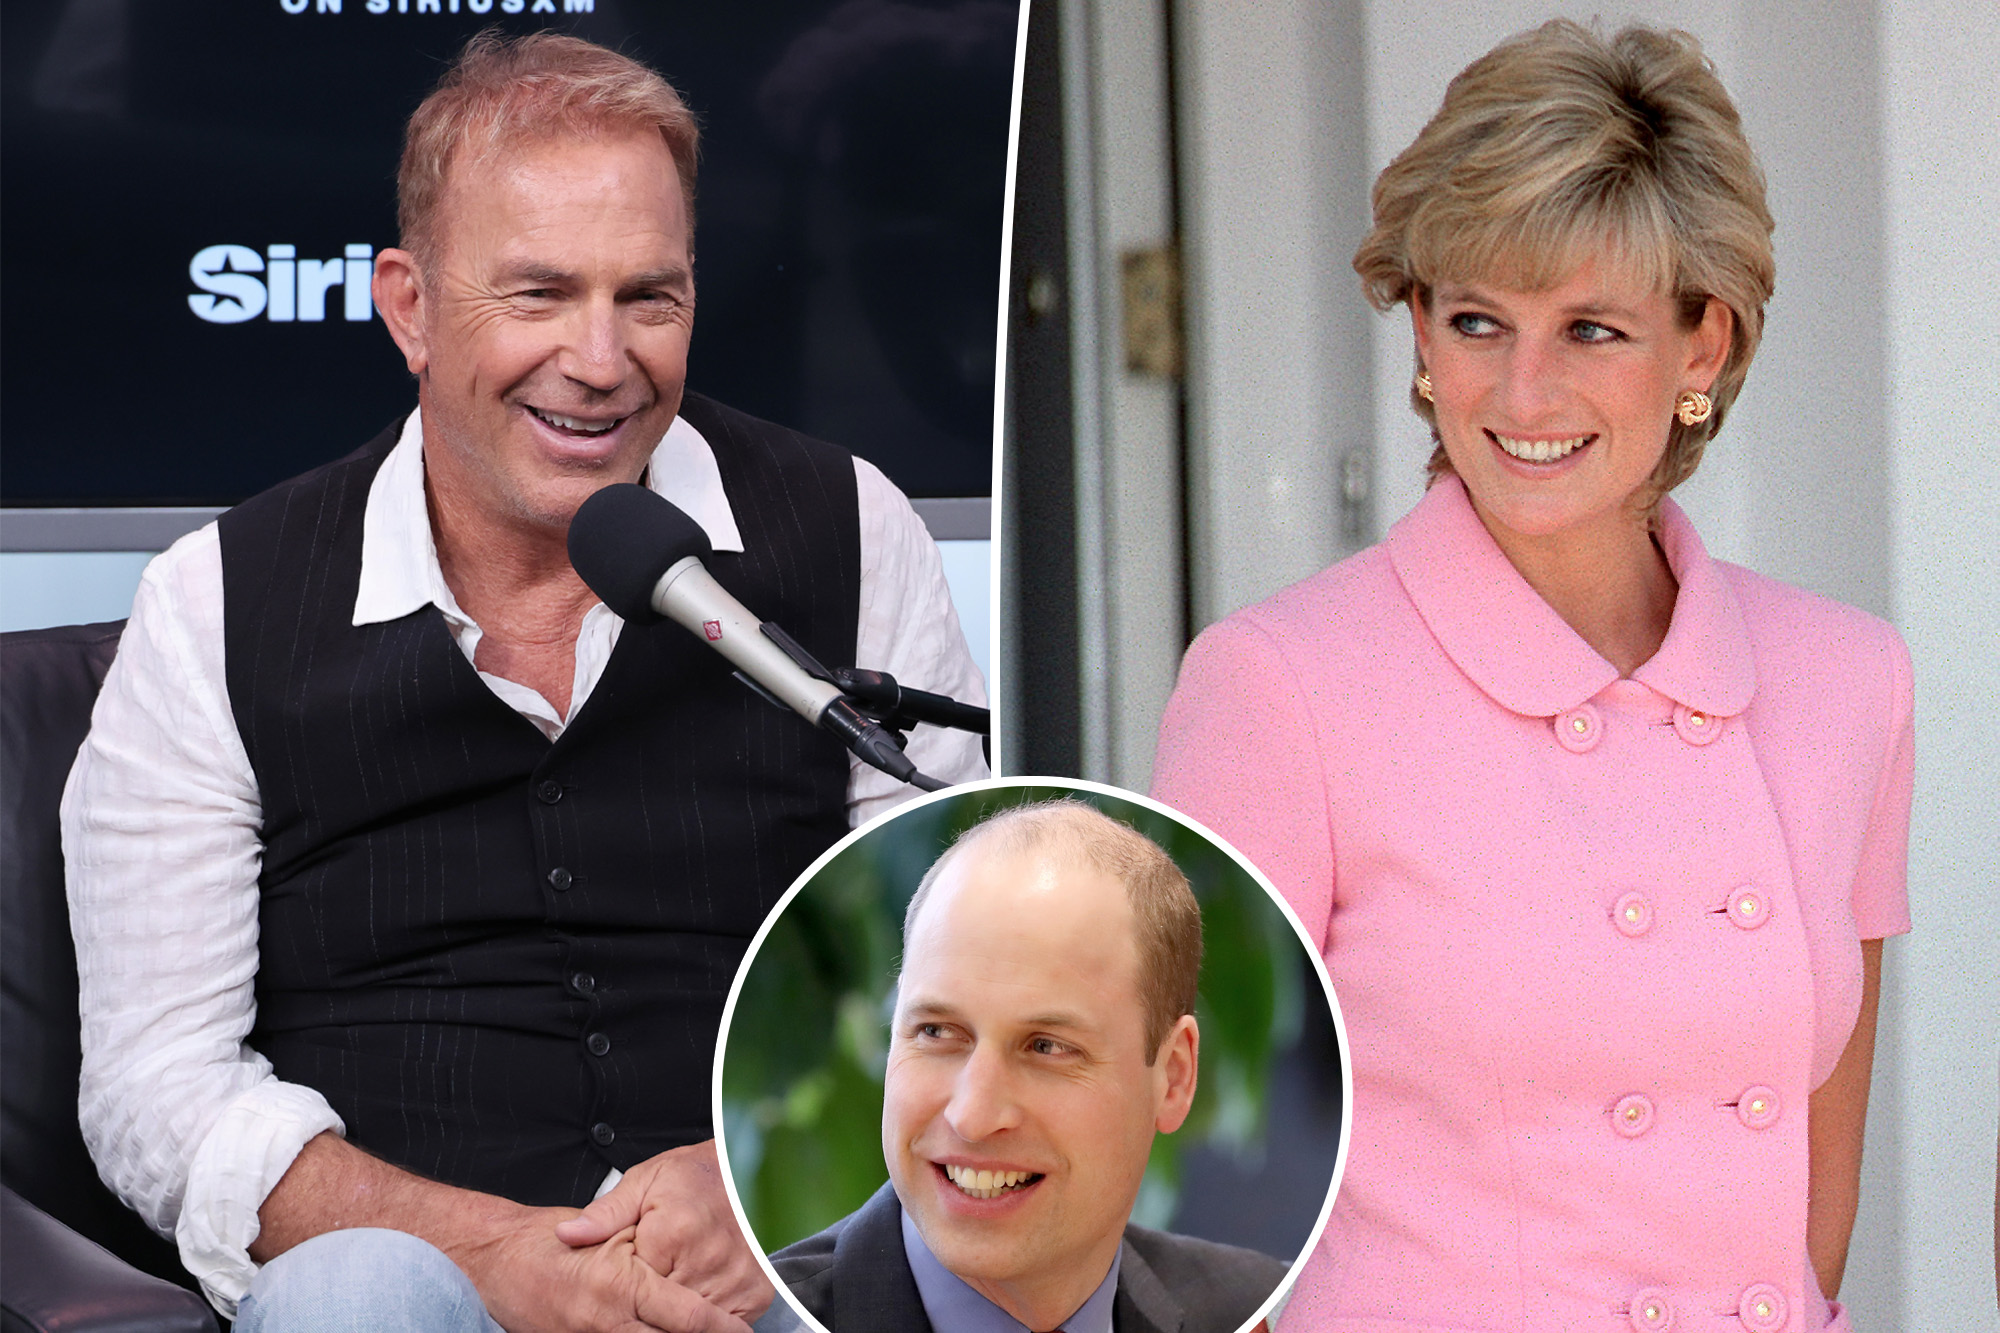 Kevin Costner Reveals Princess Diana Had a Crush on Him, According to Prince William